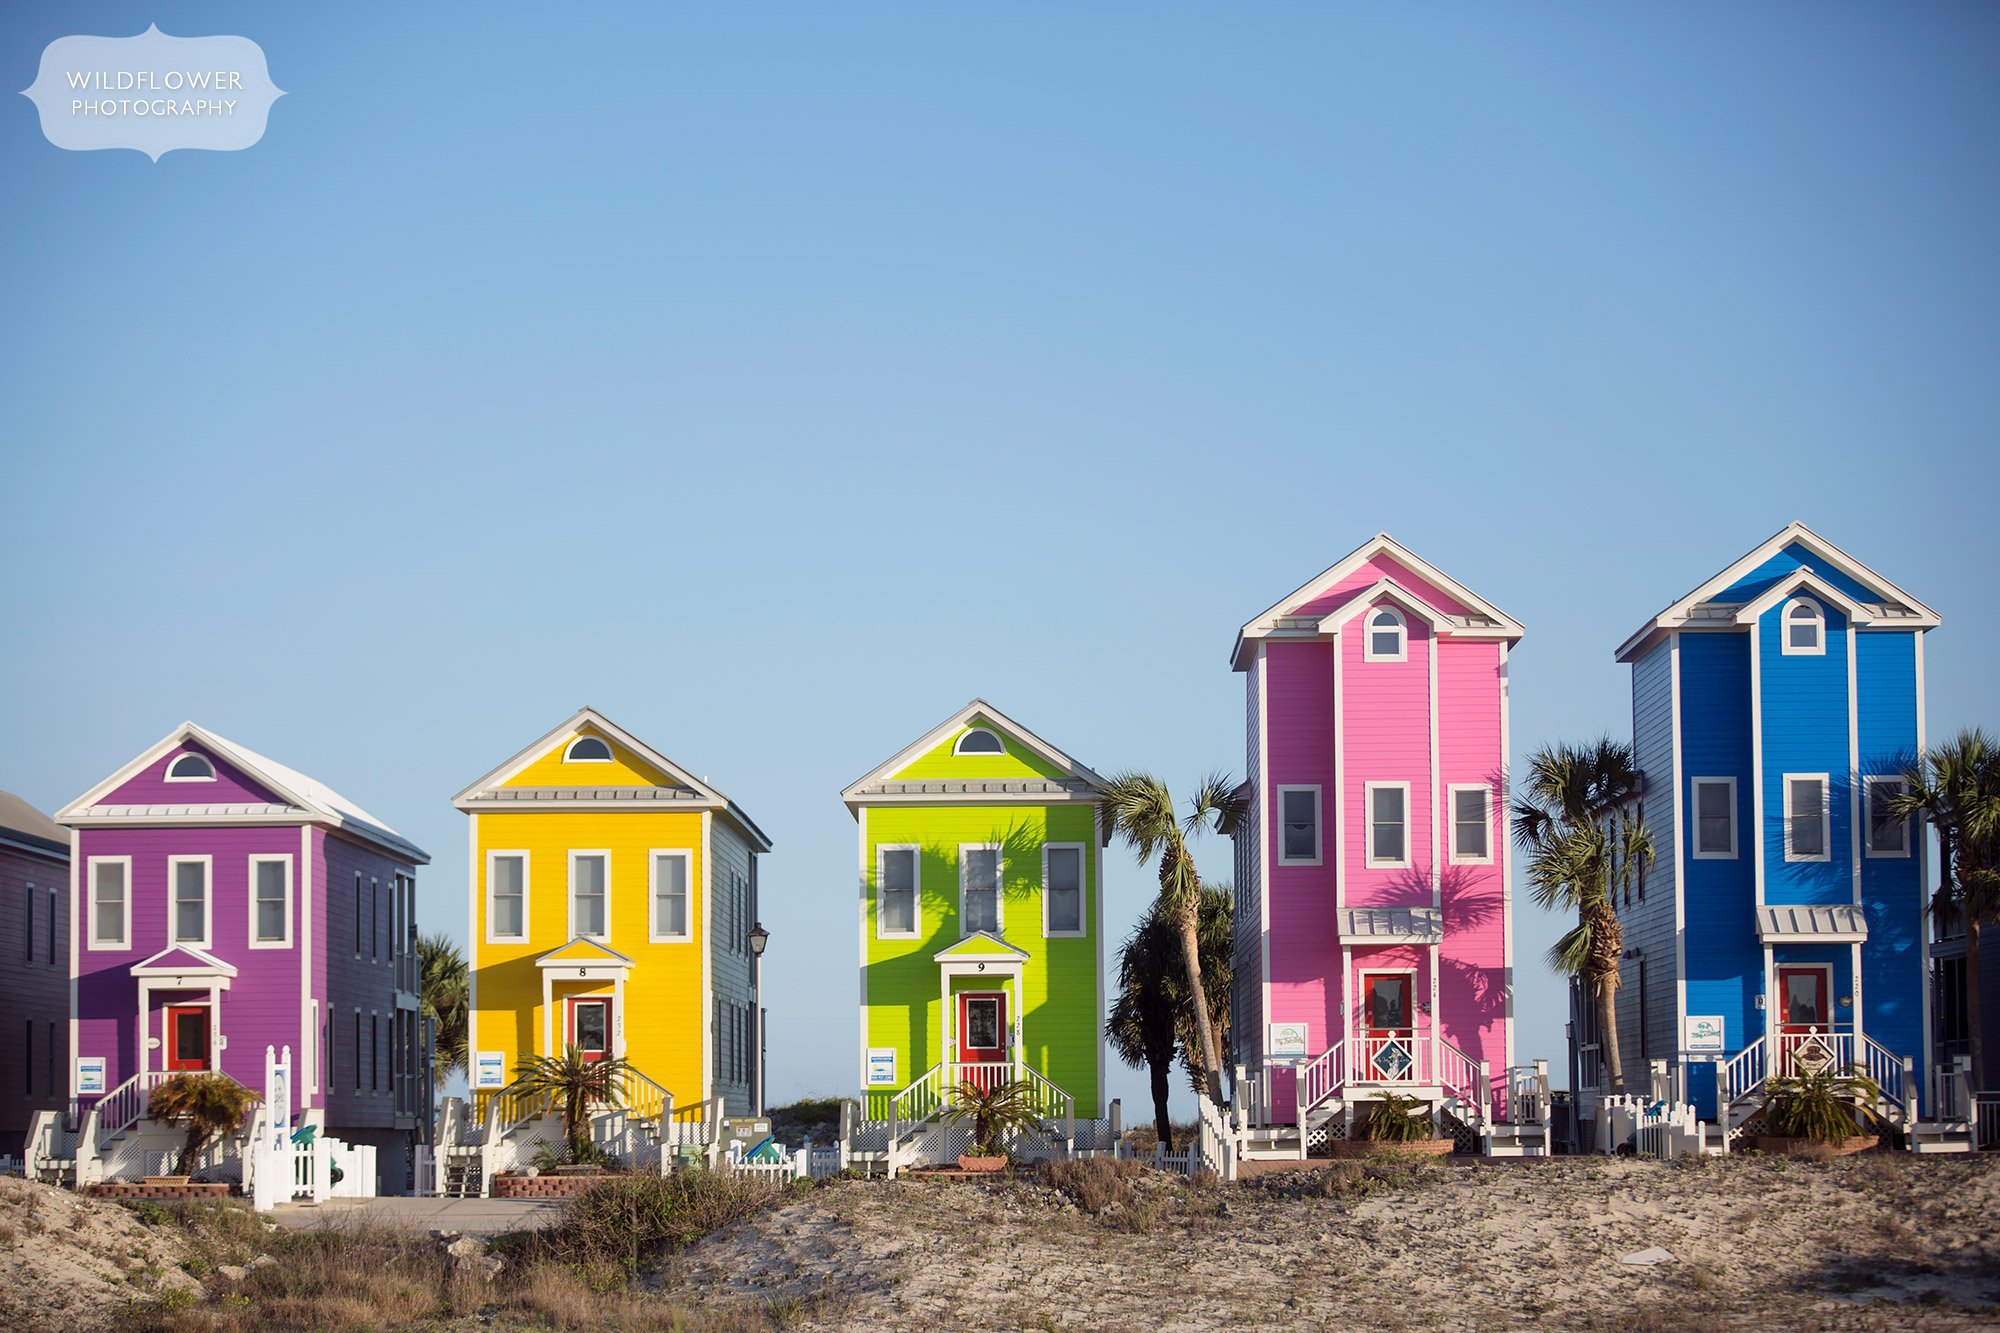 Rainbow houses in purple, yellow, lime green, pink and bright blue on St. George Island in Eastpoint, FL.